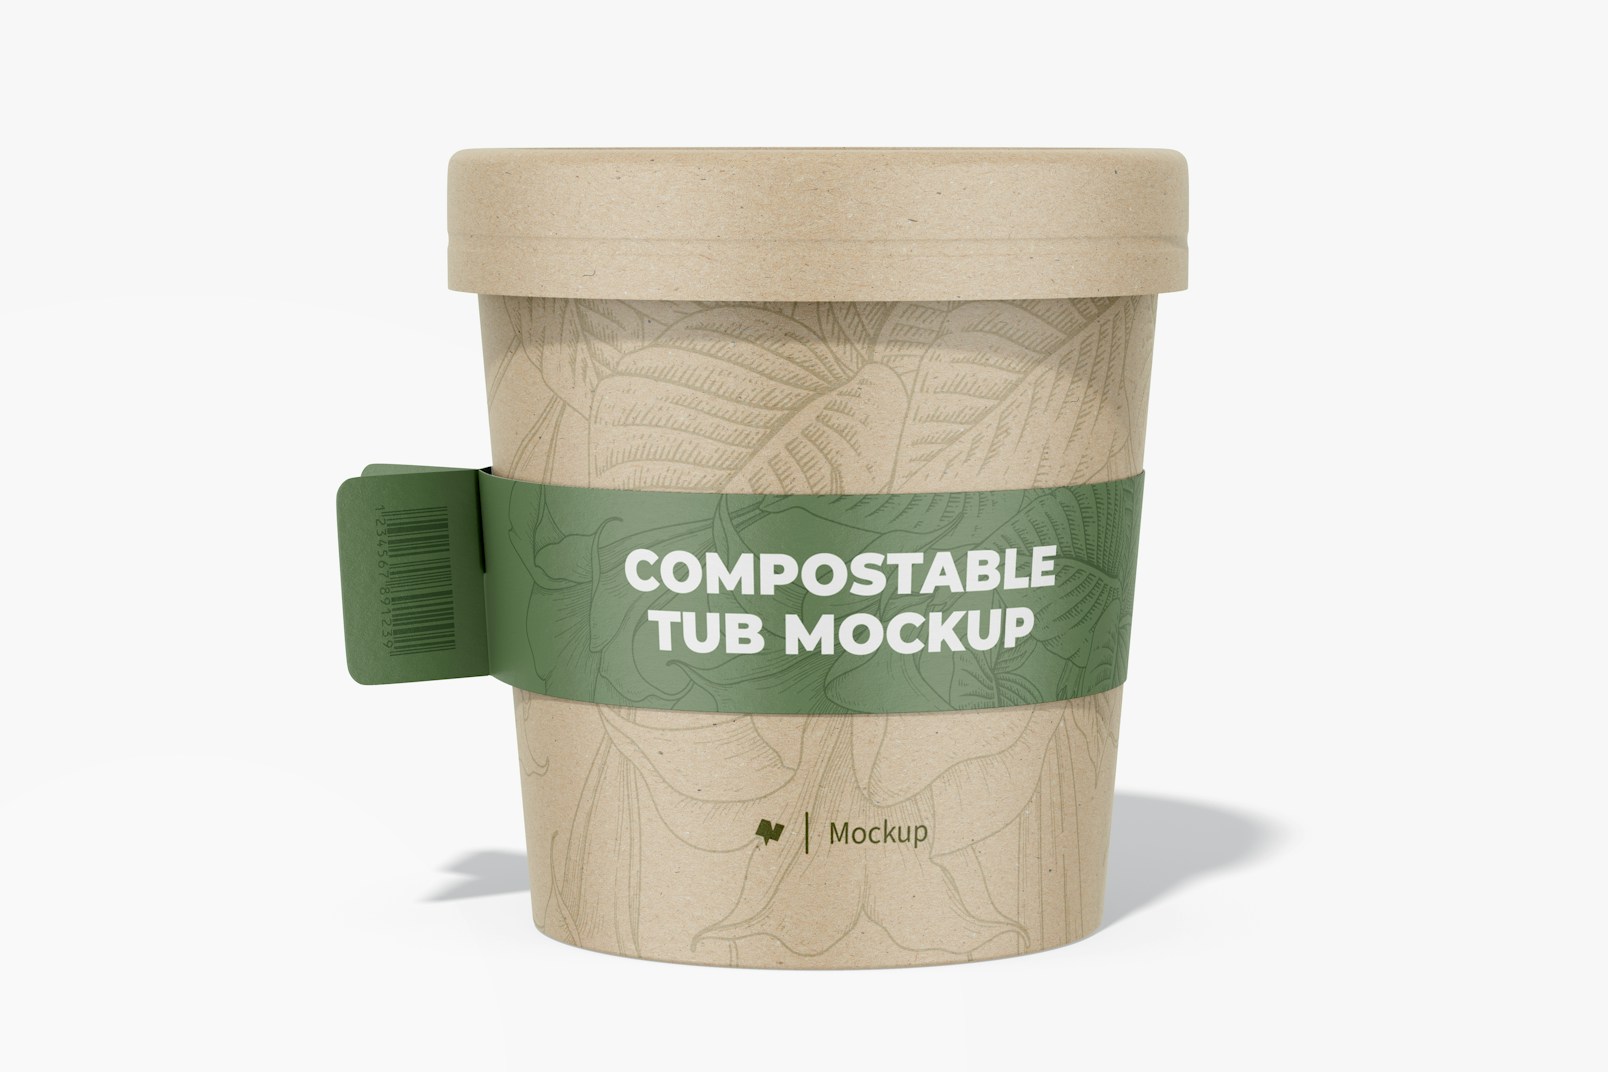 Compostable Tub with Label Mockup, Front View